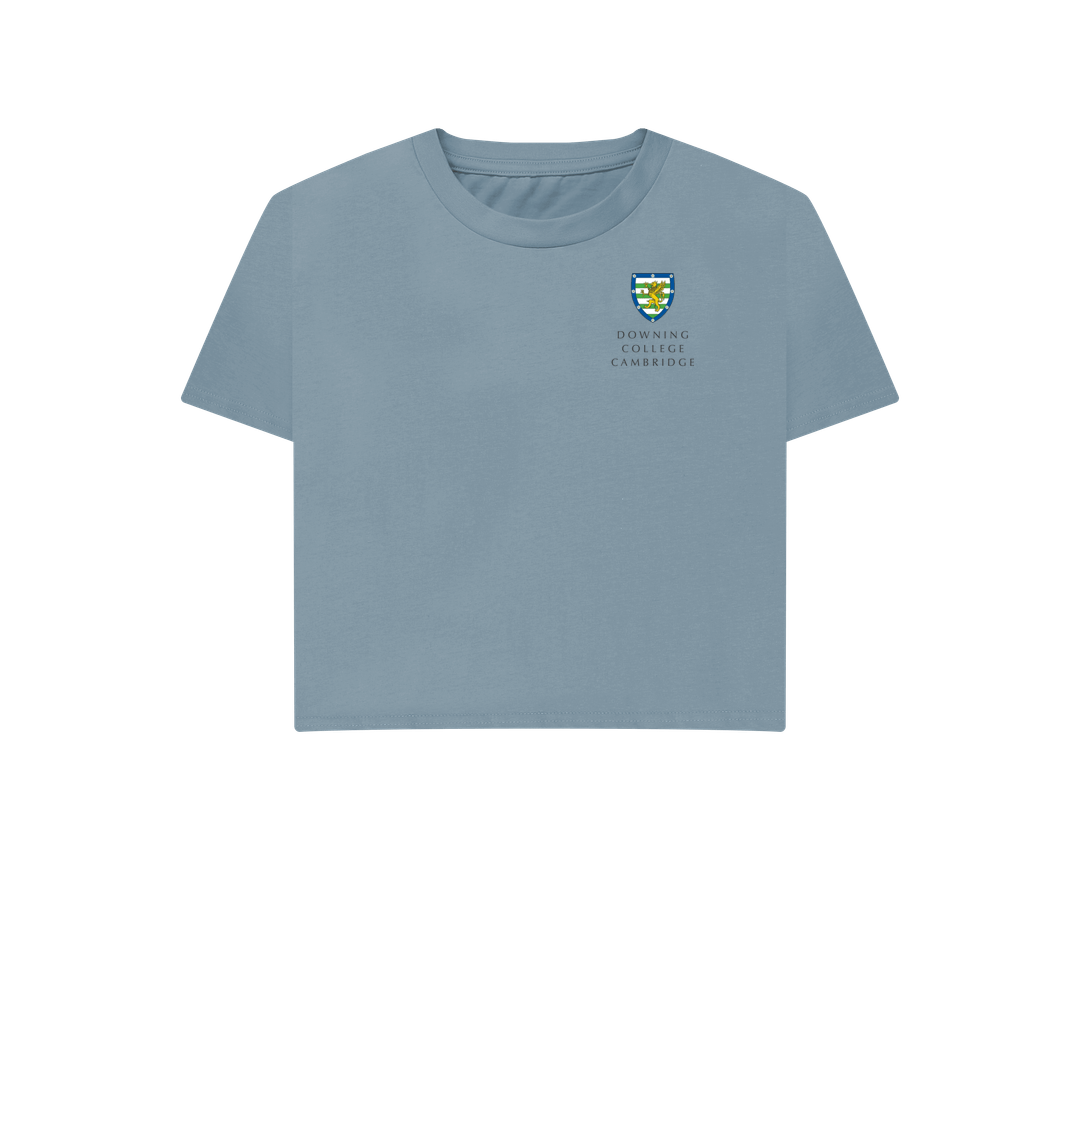 Stone Blue Downing College Women's Boxy Tee